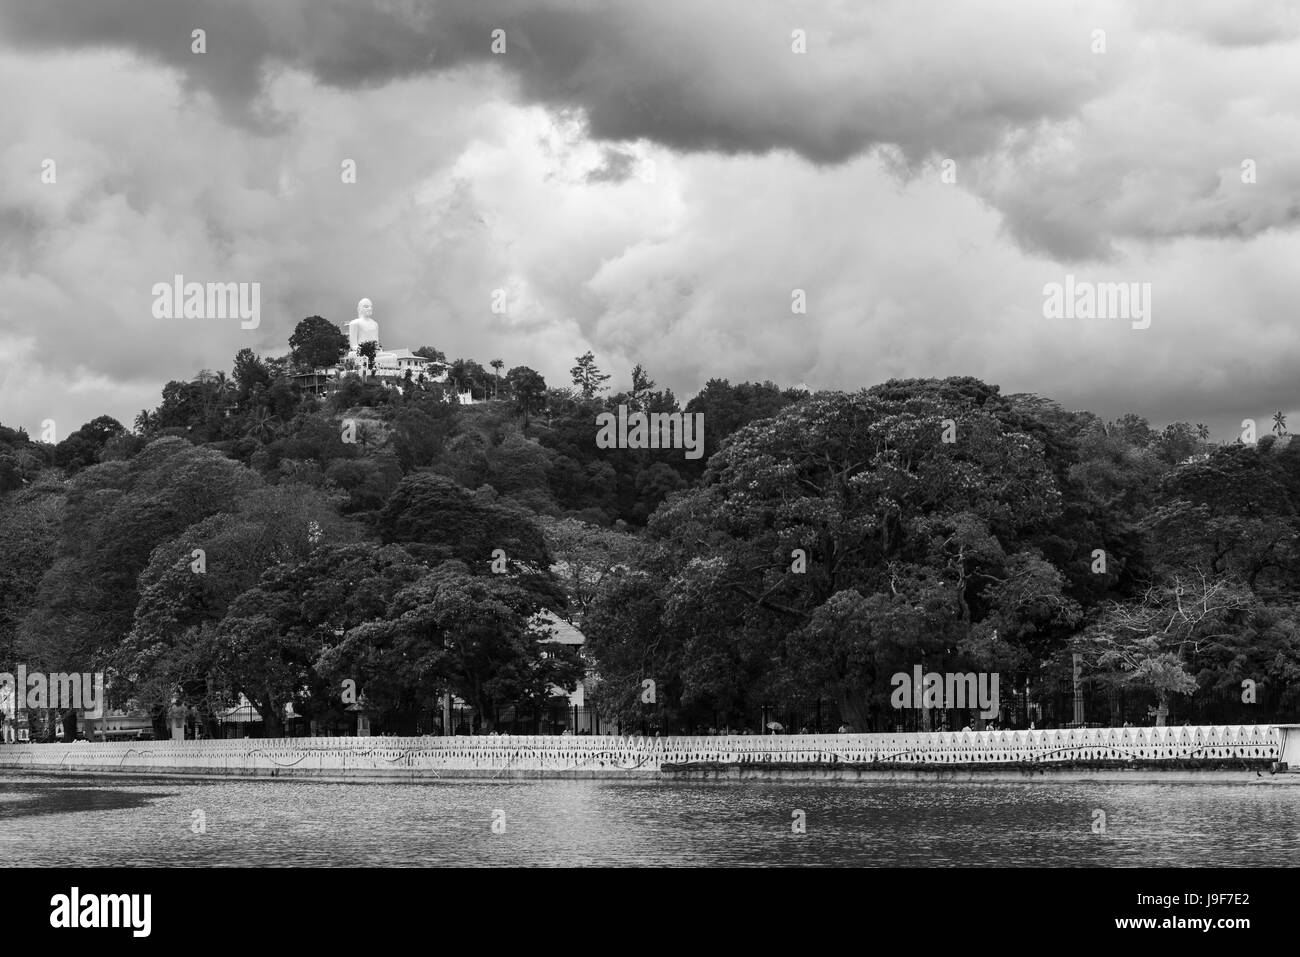 A huge statue of the Buddha sits atop a hill overlooking the Lake in Kandy, Sri Lanka Stock Photo